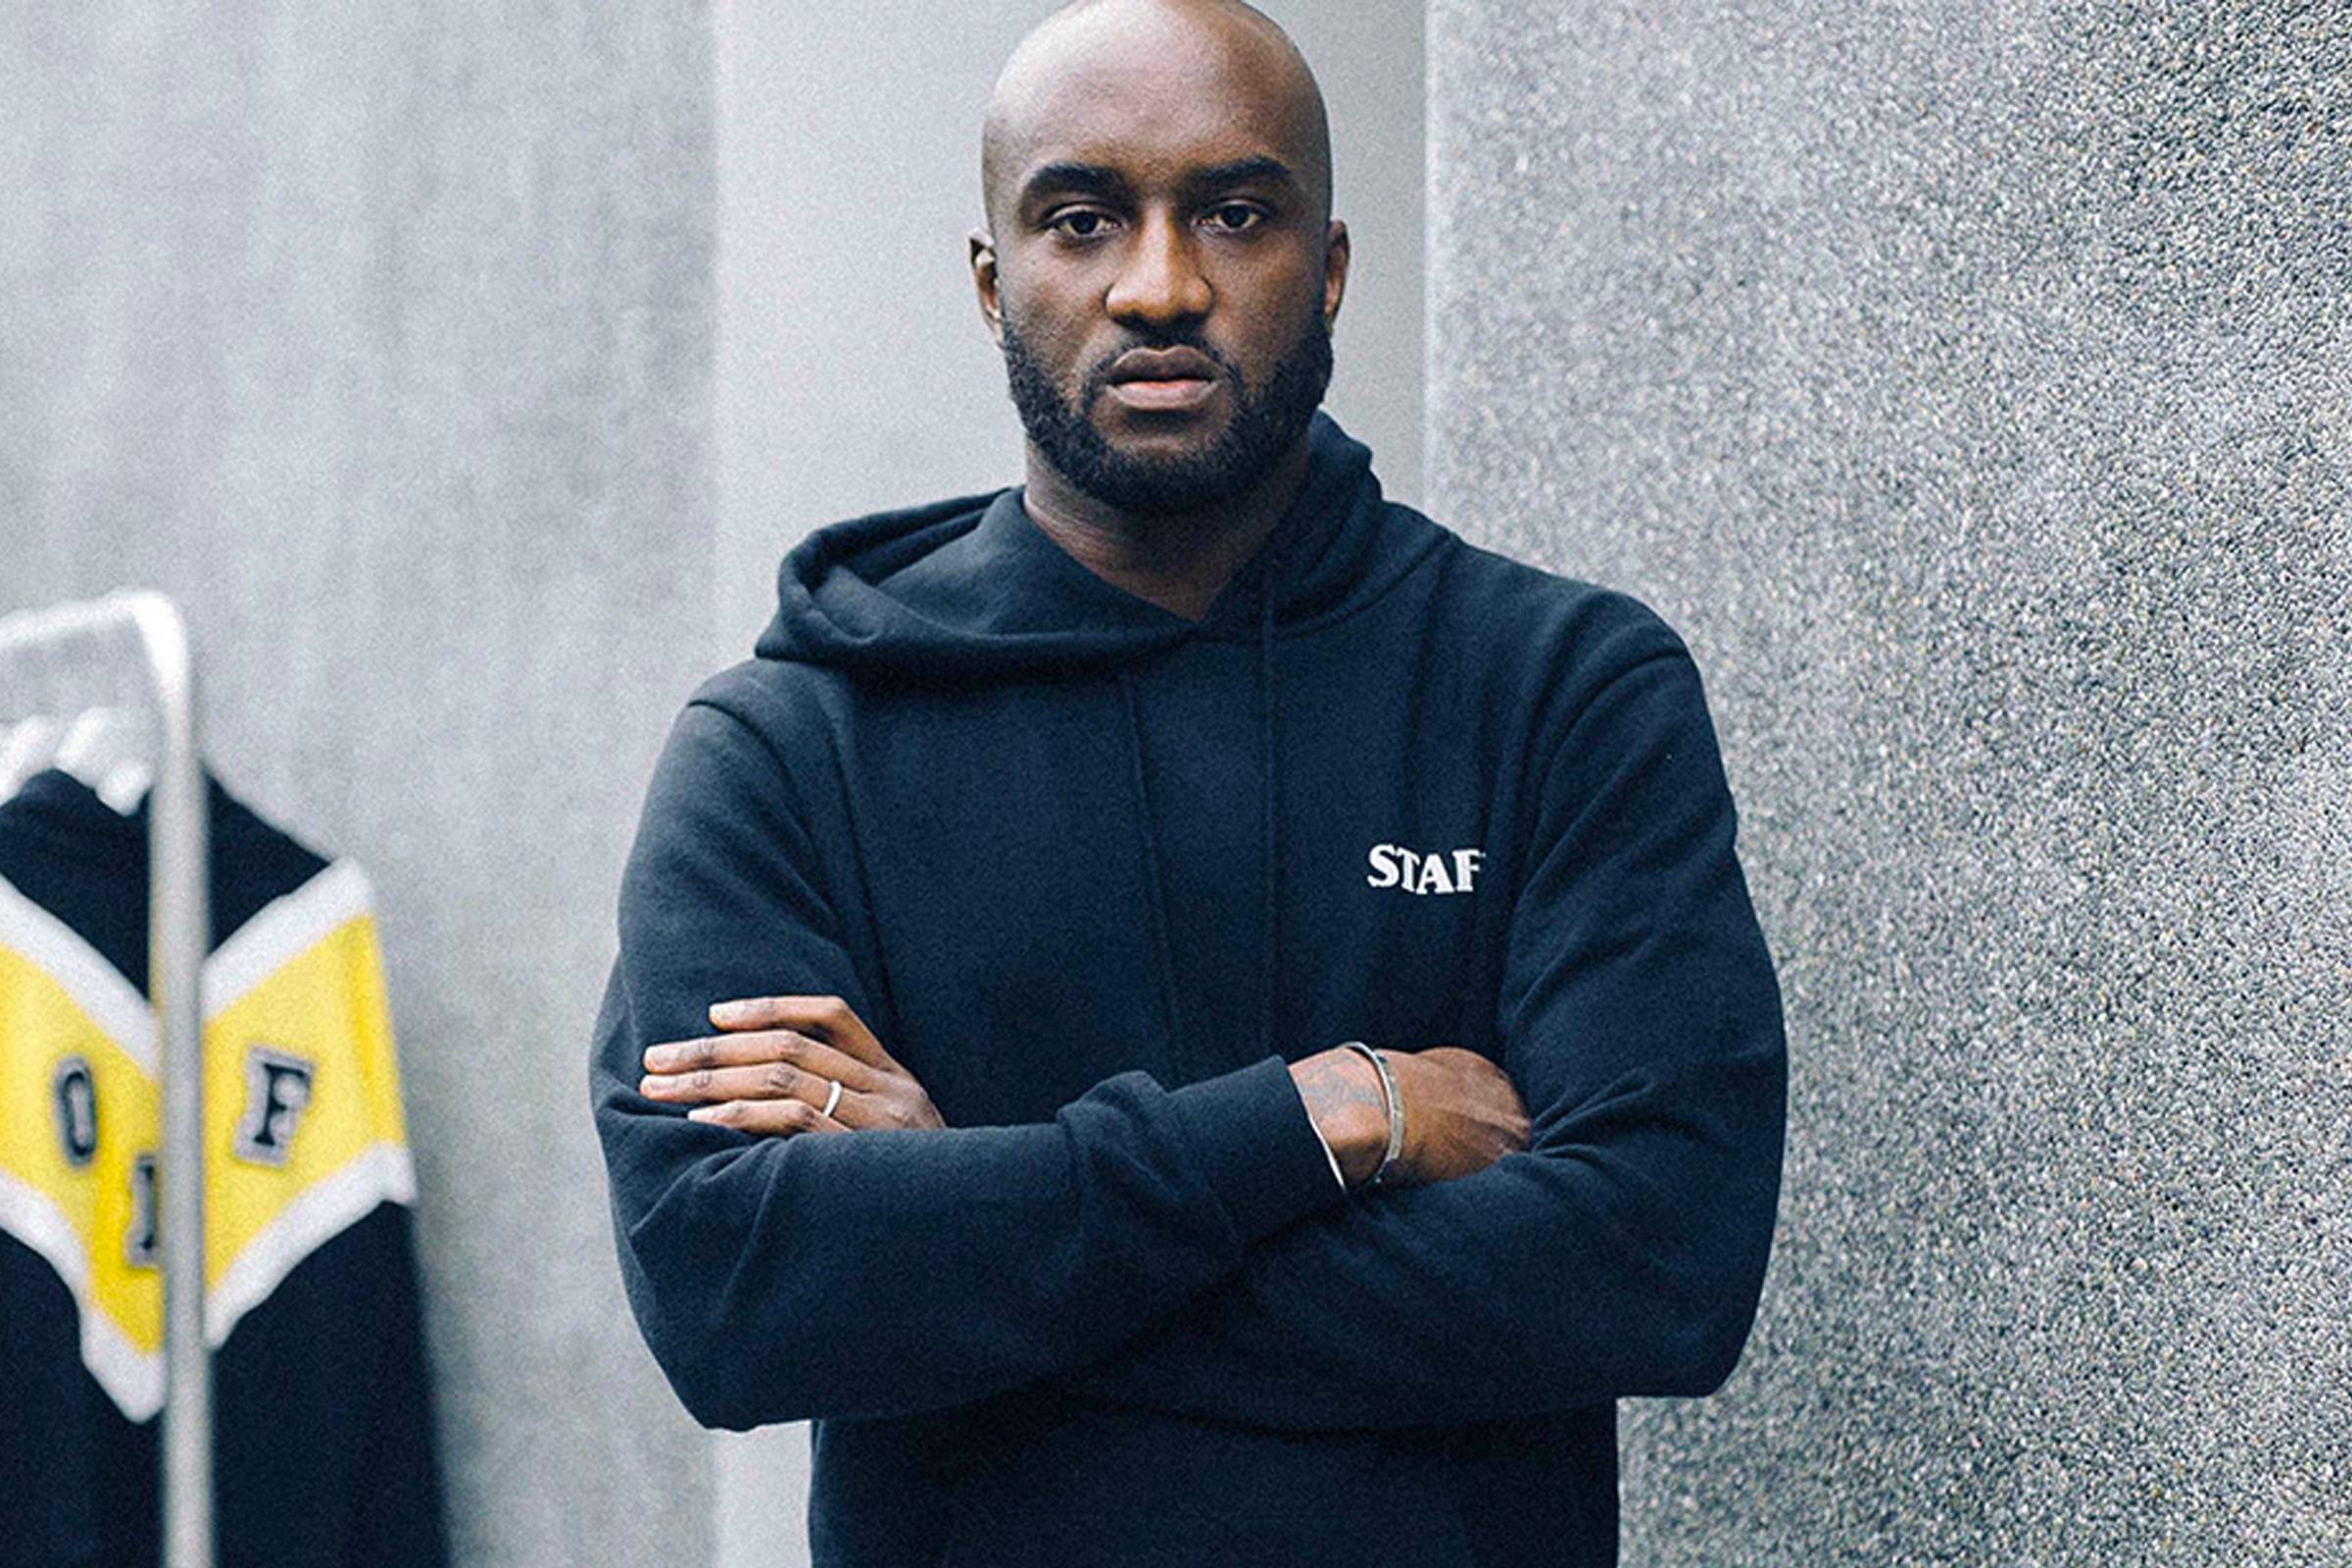 Virgil Abloh says his Louis Vuitton harnesses are 'empowering